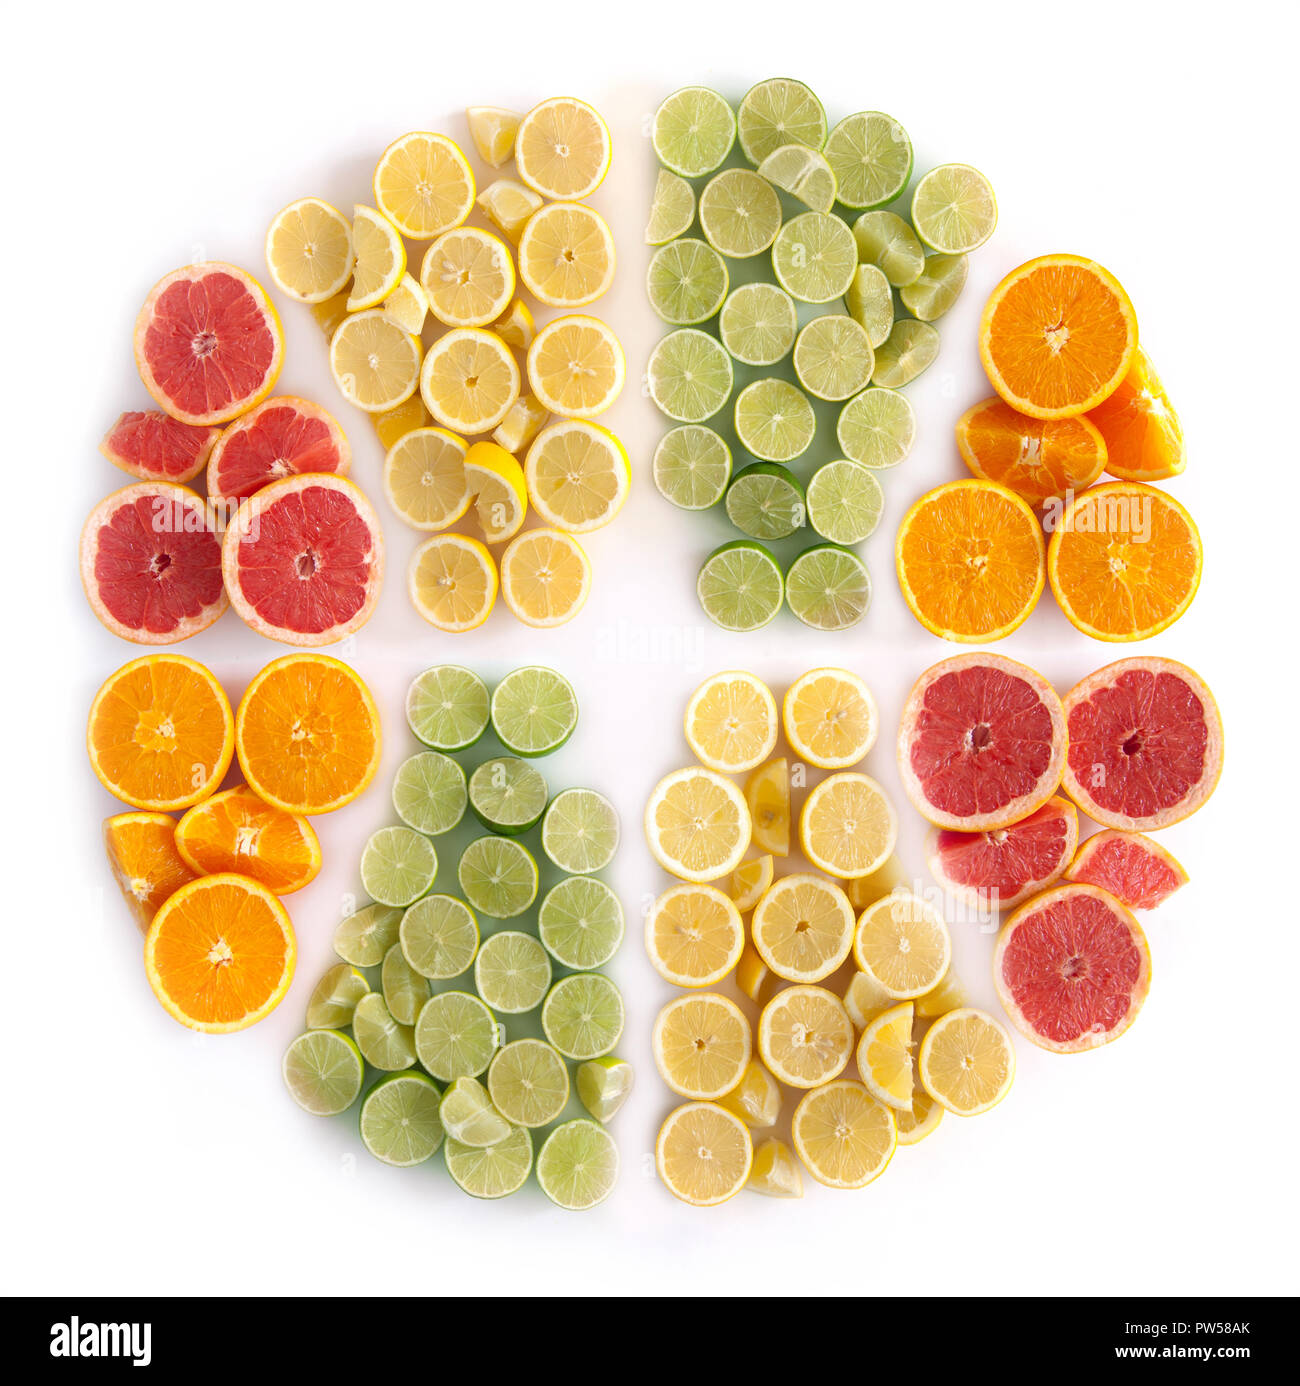 Many fruits in the shape of a sliced citrus including oranges, grapefruits, lemons and limes Stock Photo